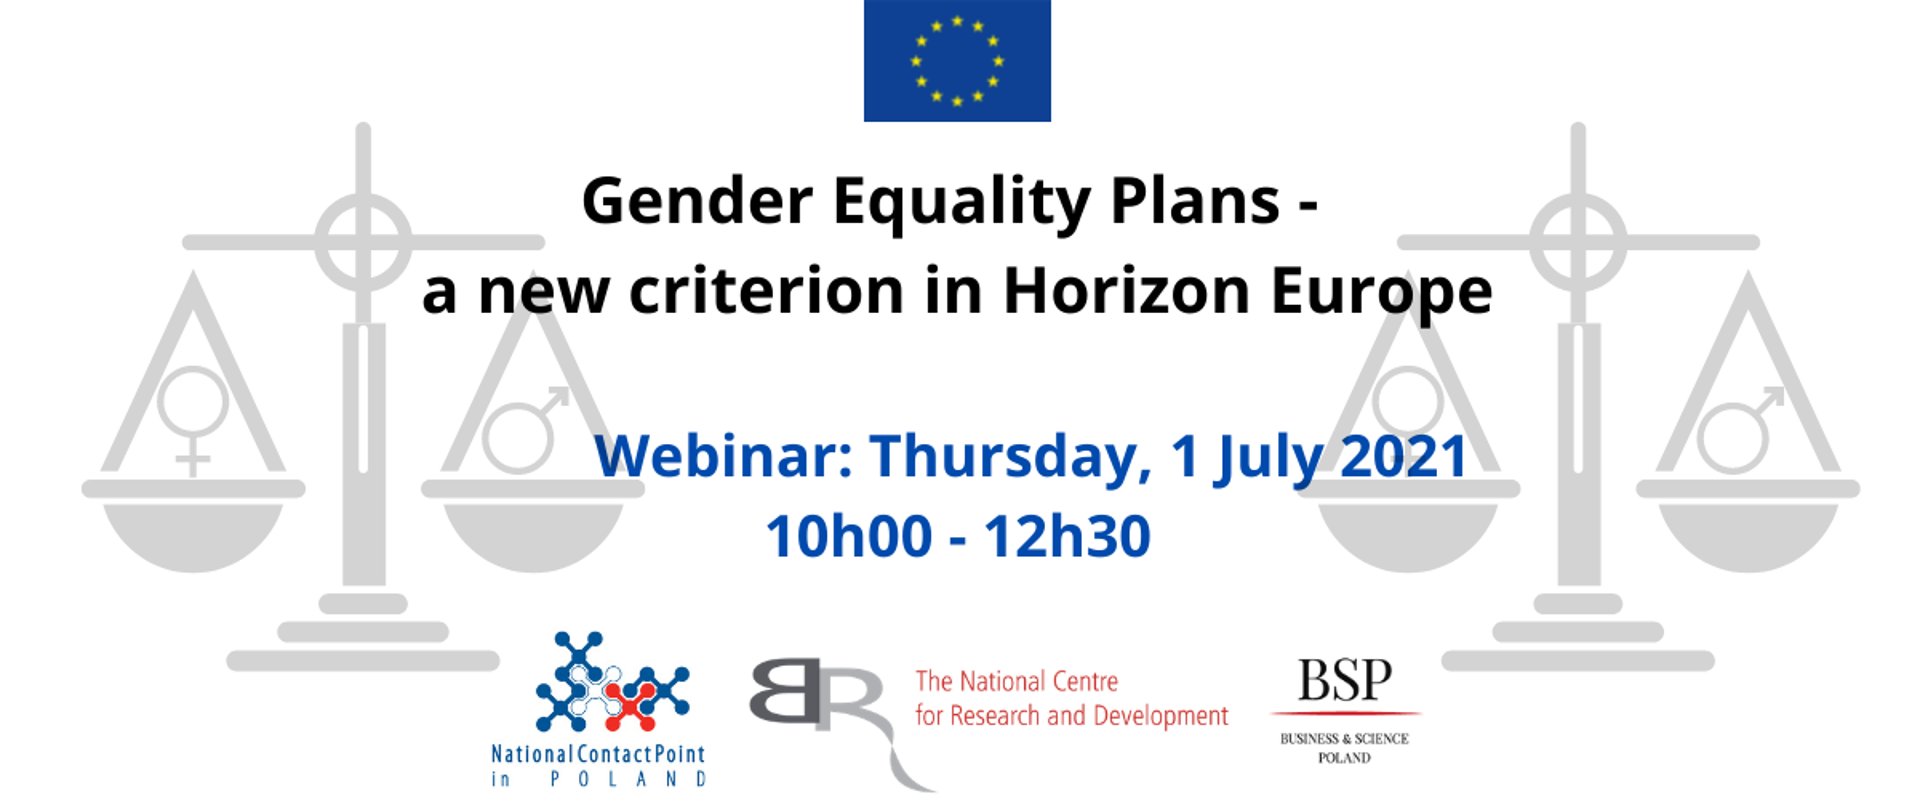 Webinar: Gender Equality Plans - a new criterion in Horizon Europe 